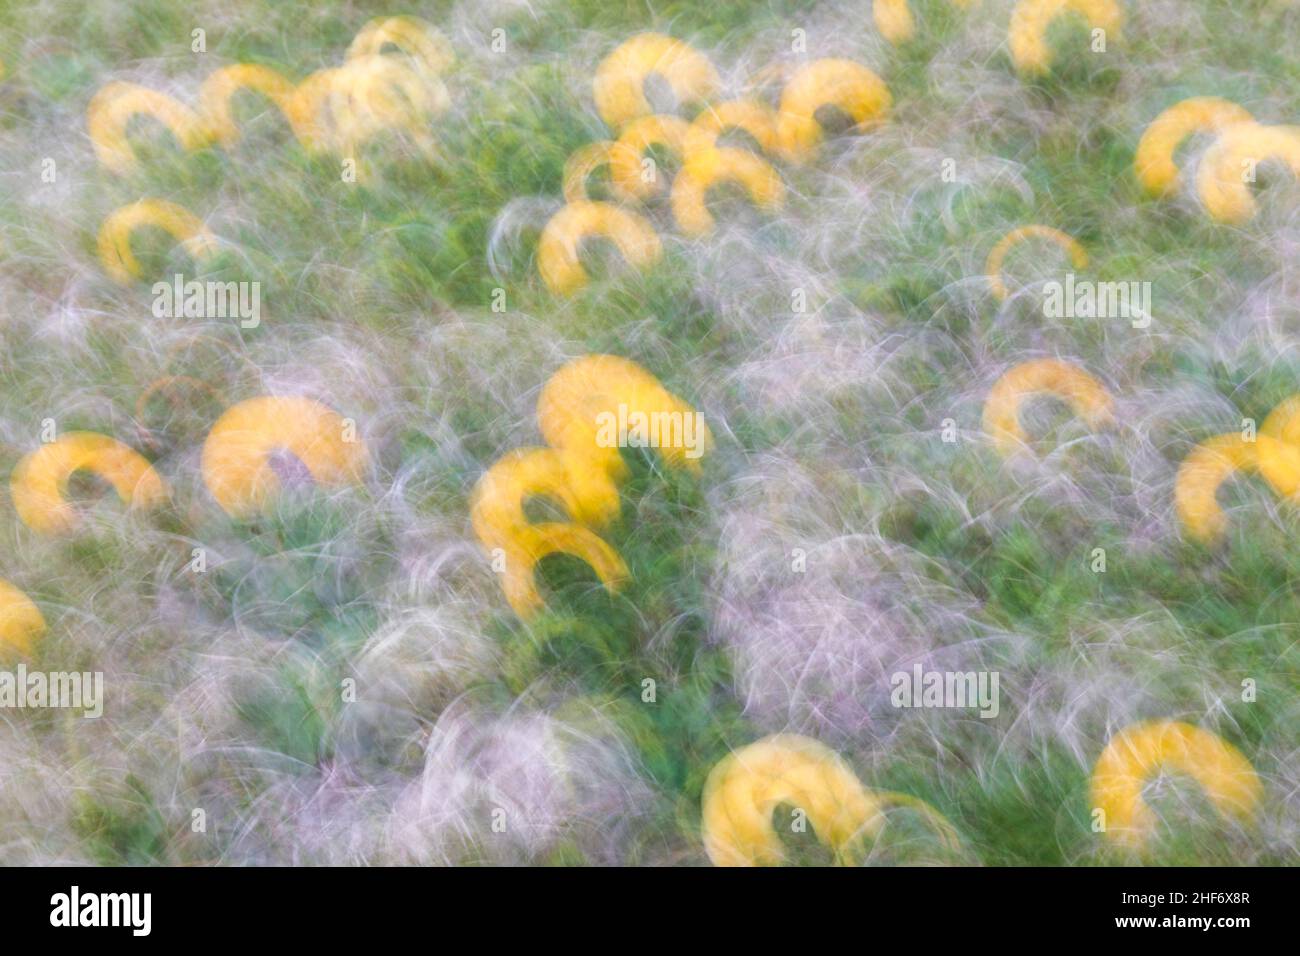 Abstract image,  spring flowery meadow,  blurred photography Stock Photo